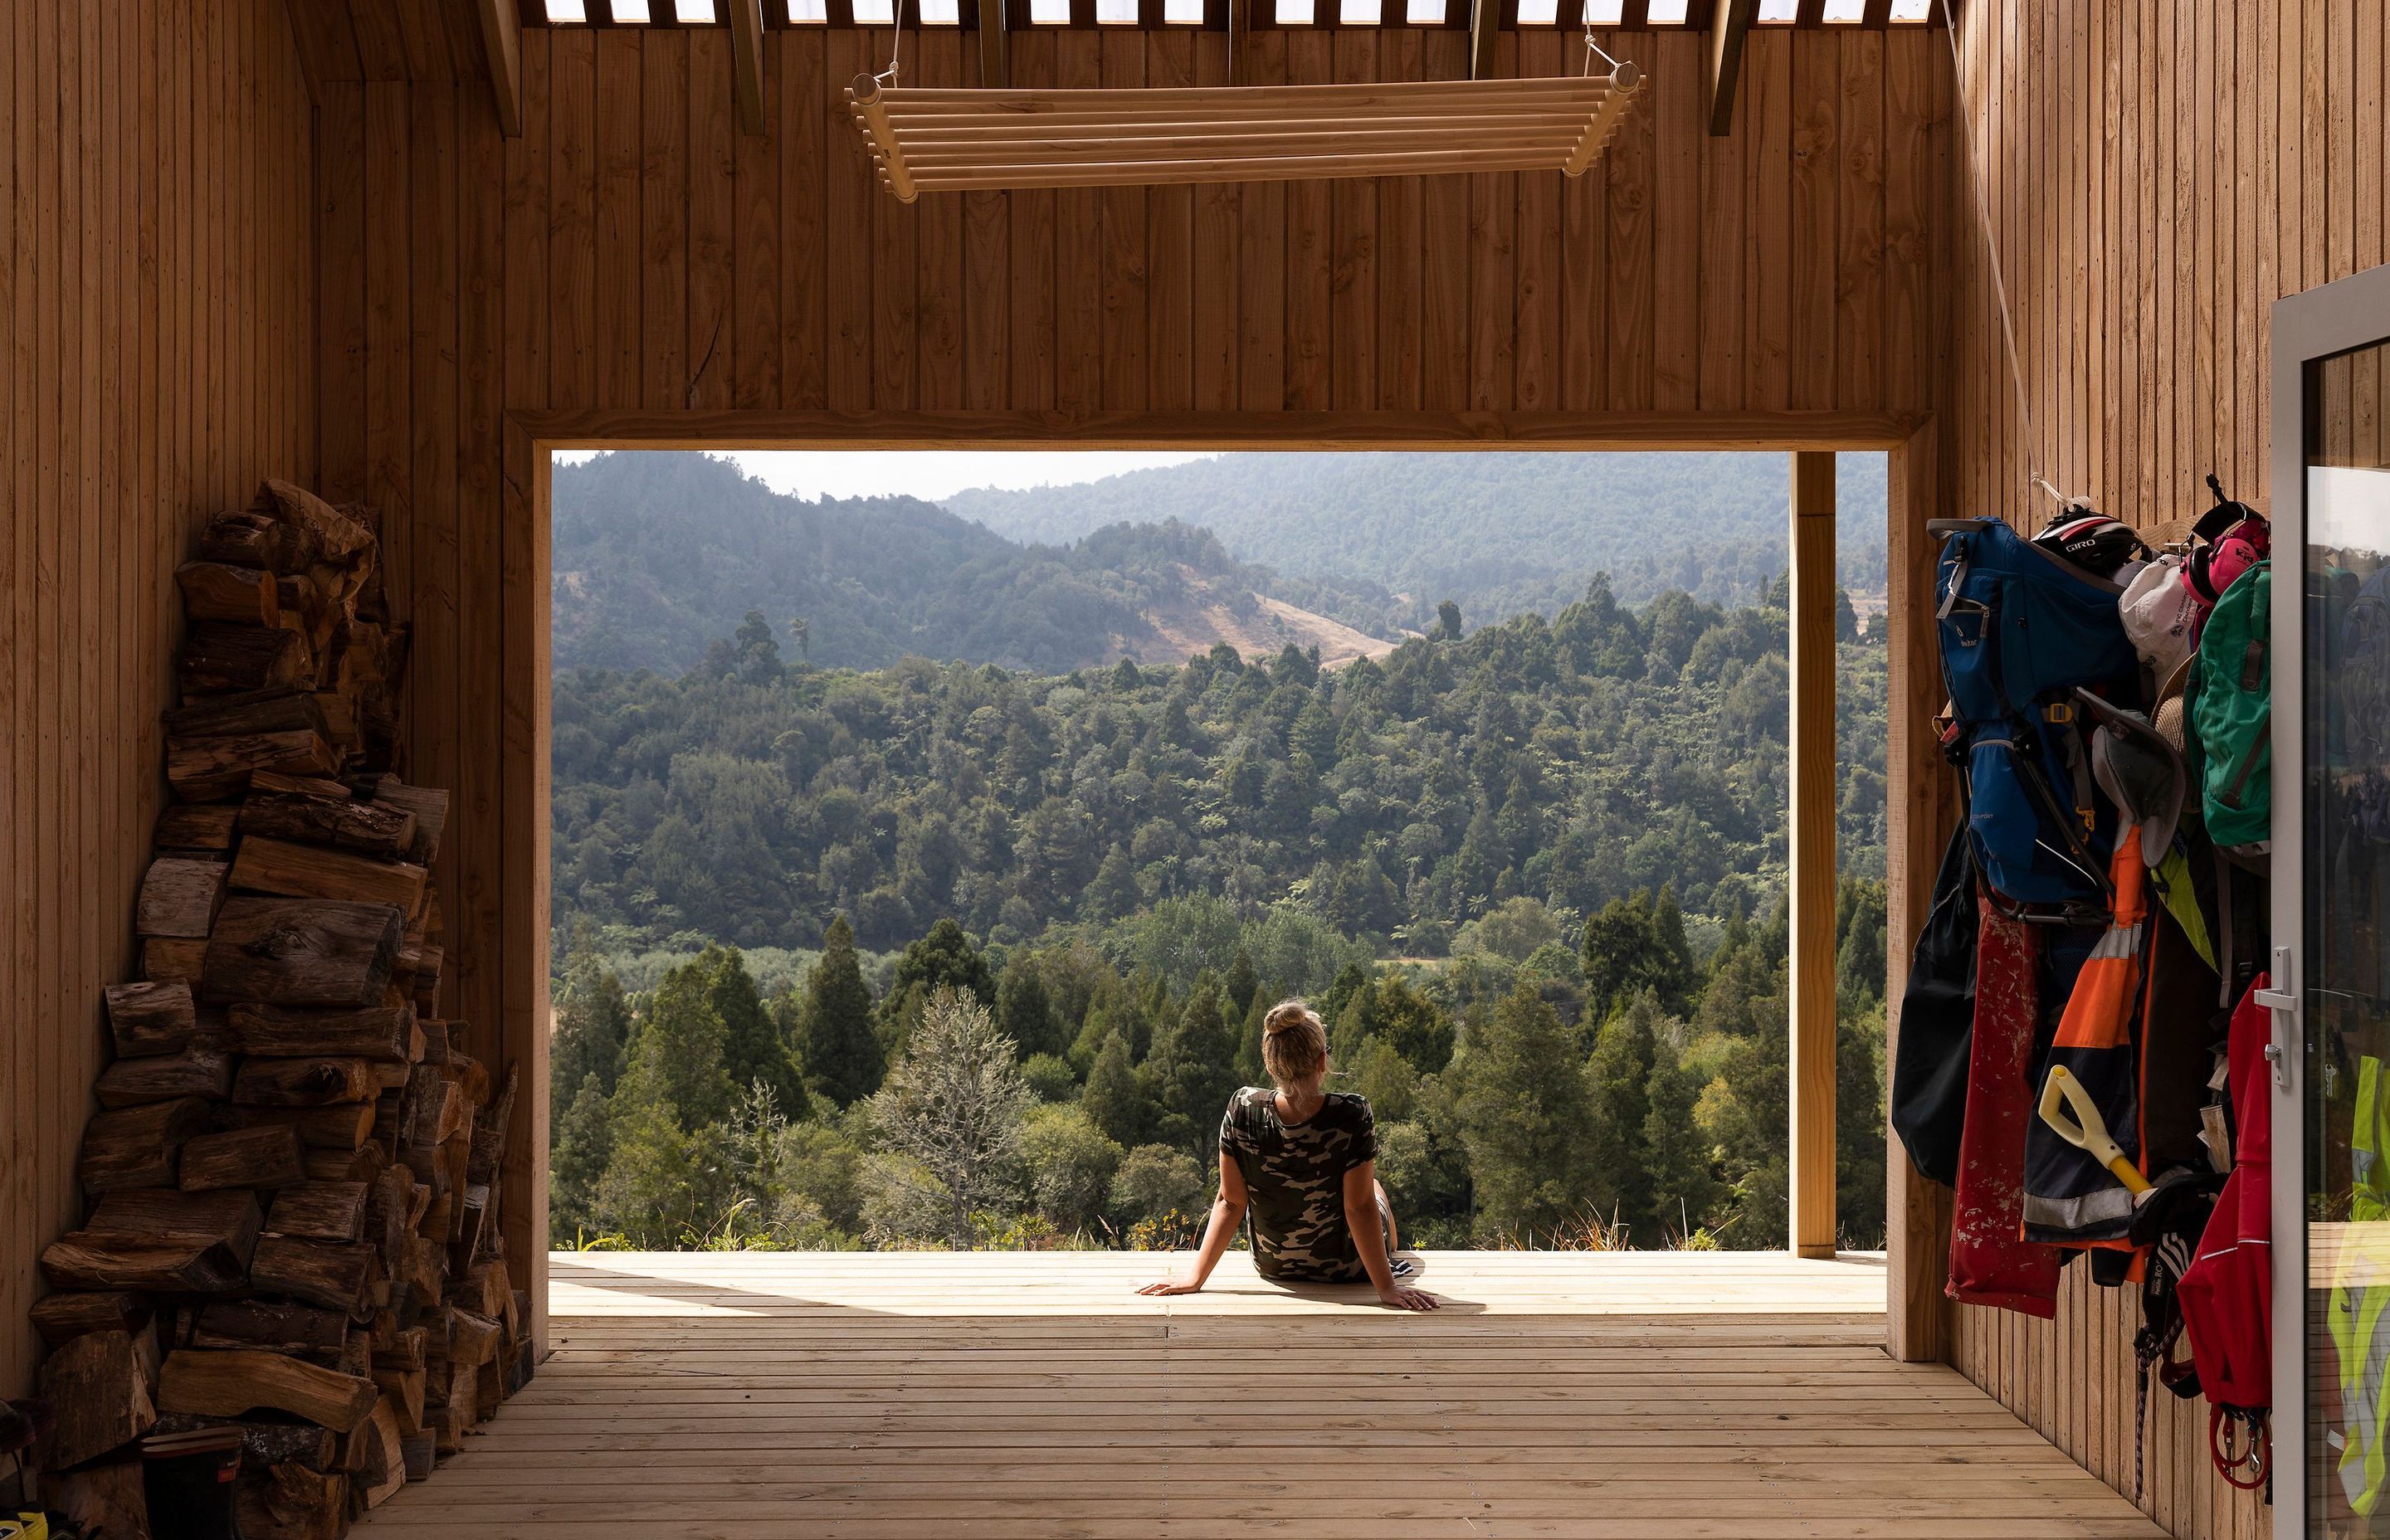 A sunny view of bush-clad hills from the timber-clad outdoor room.